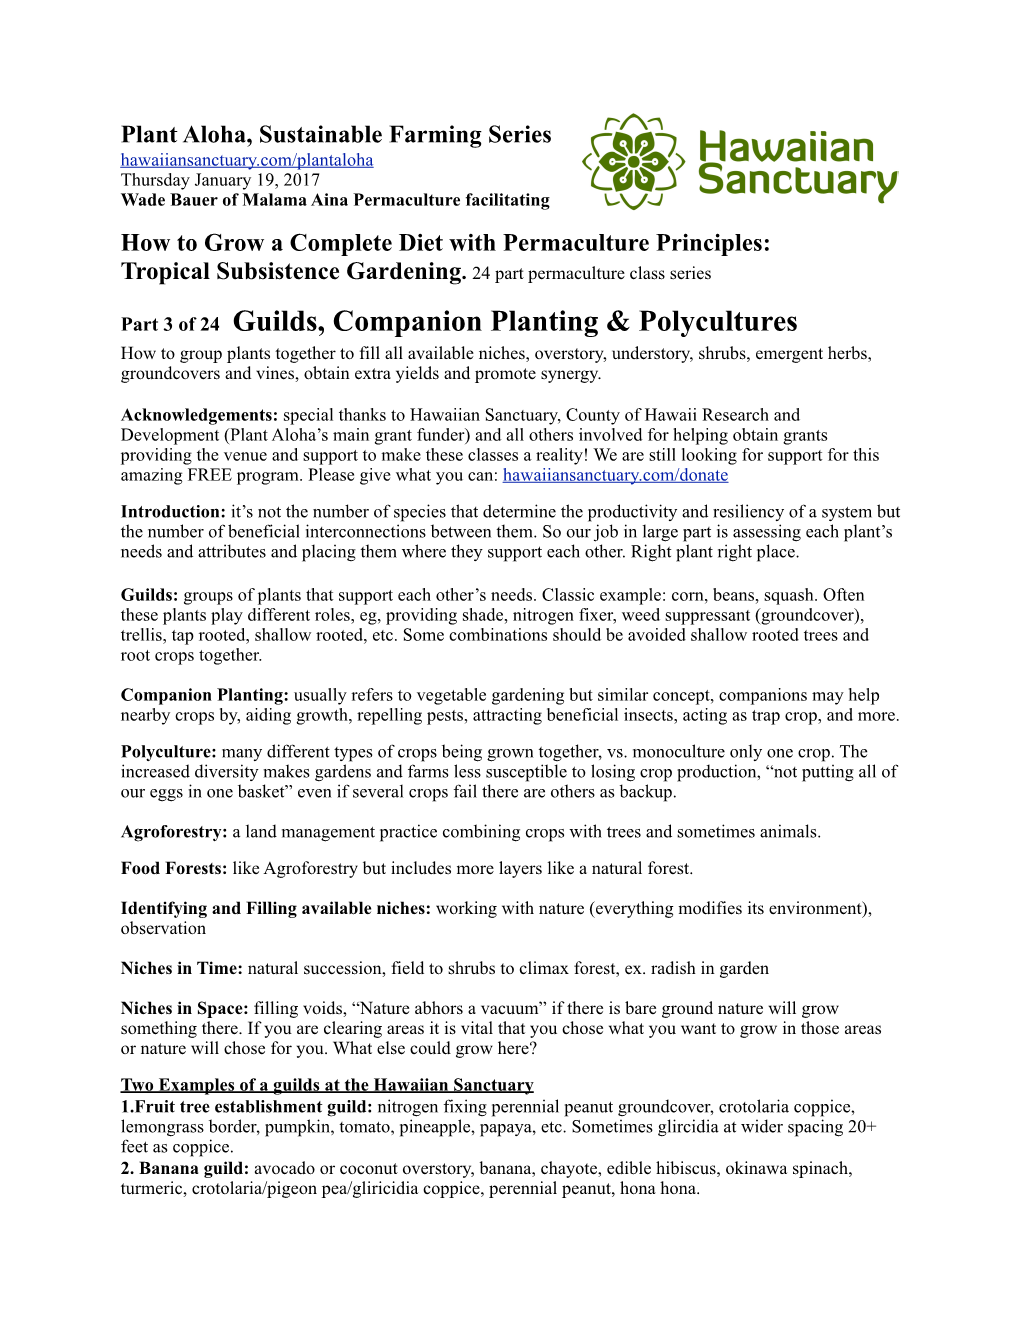 Part 3 of 24 Guilds, Companion Planting & Polycultures